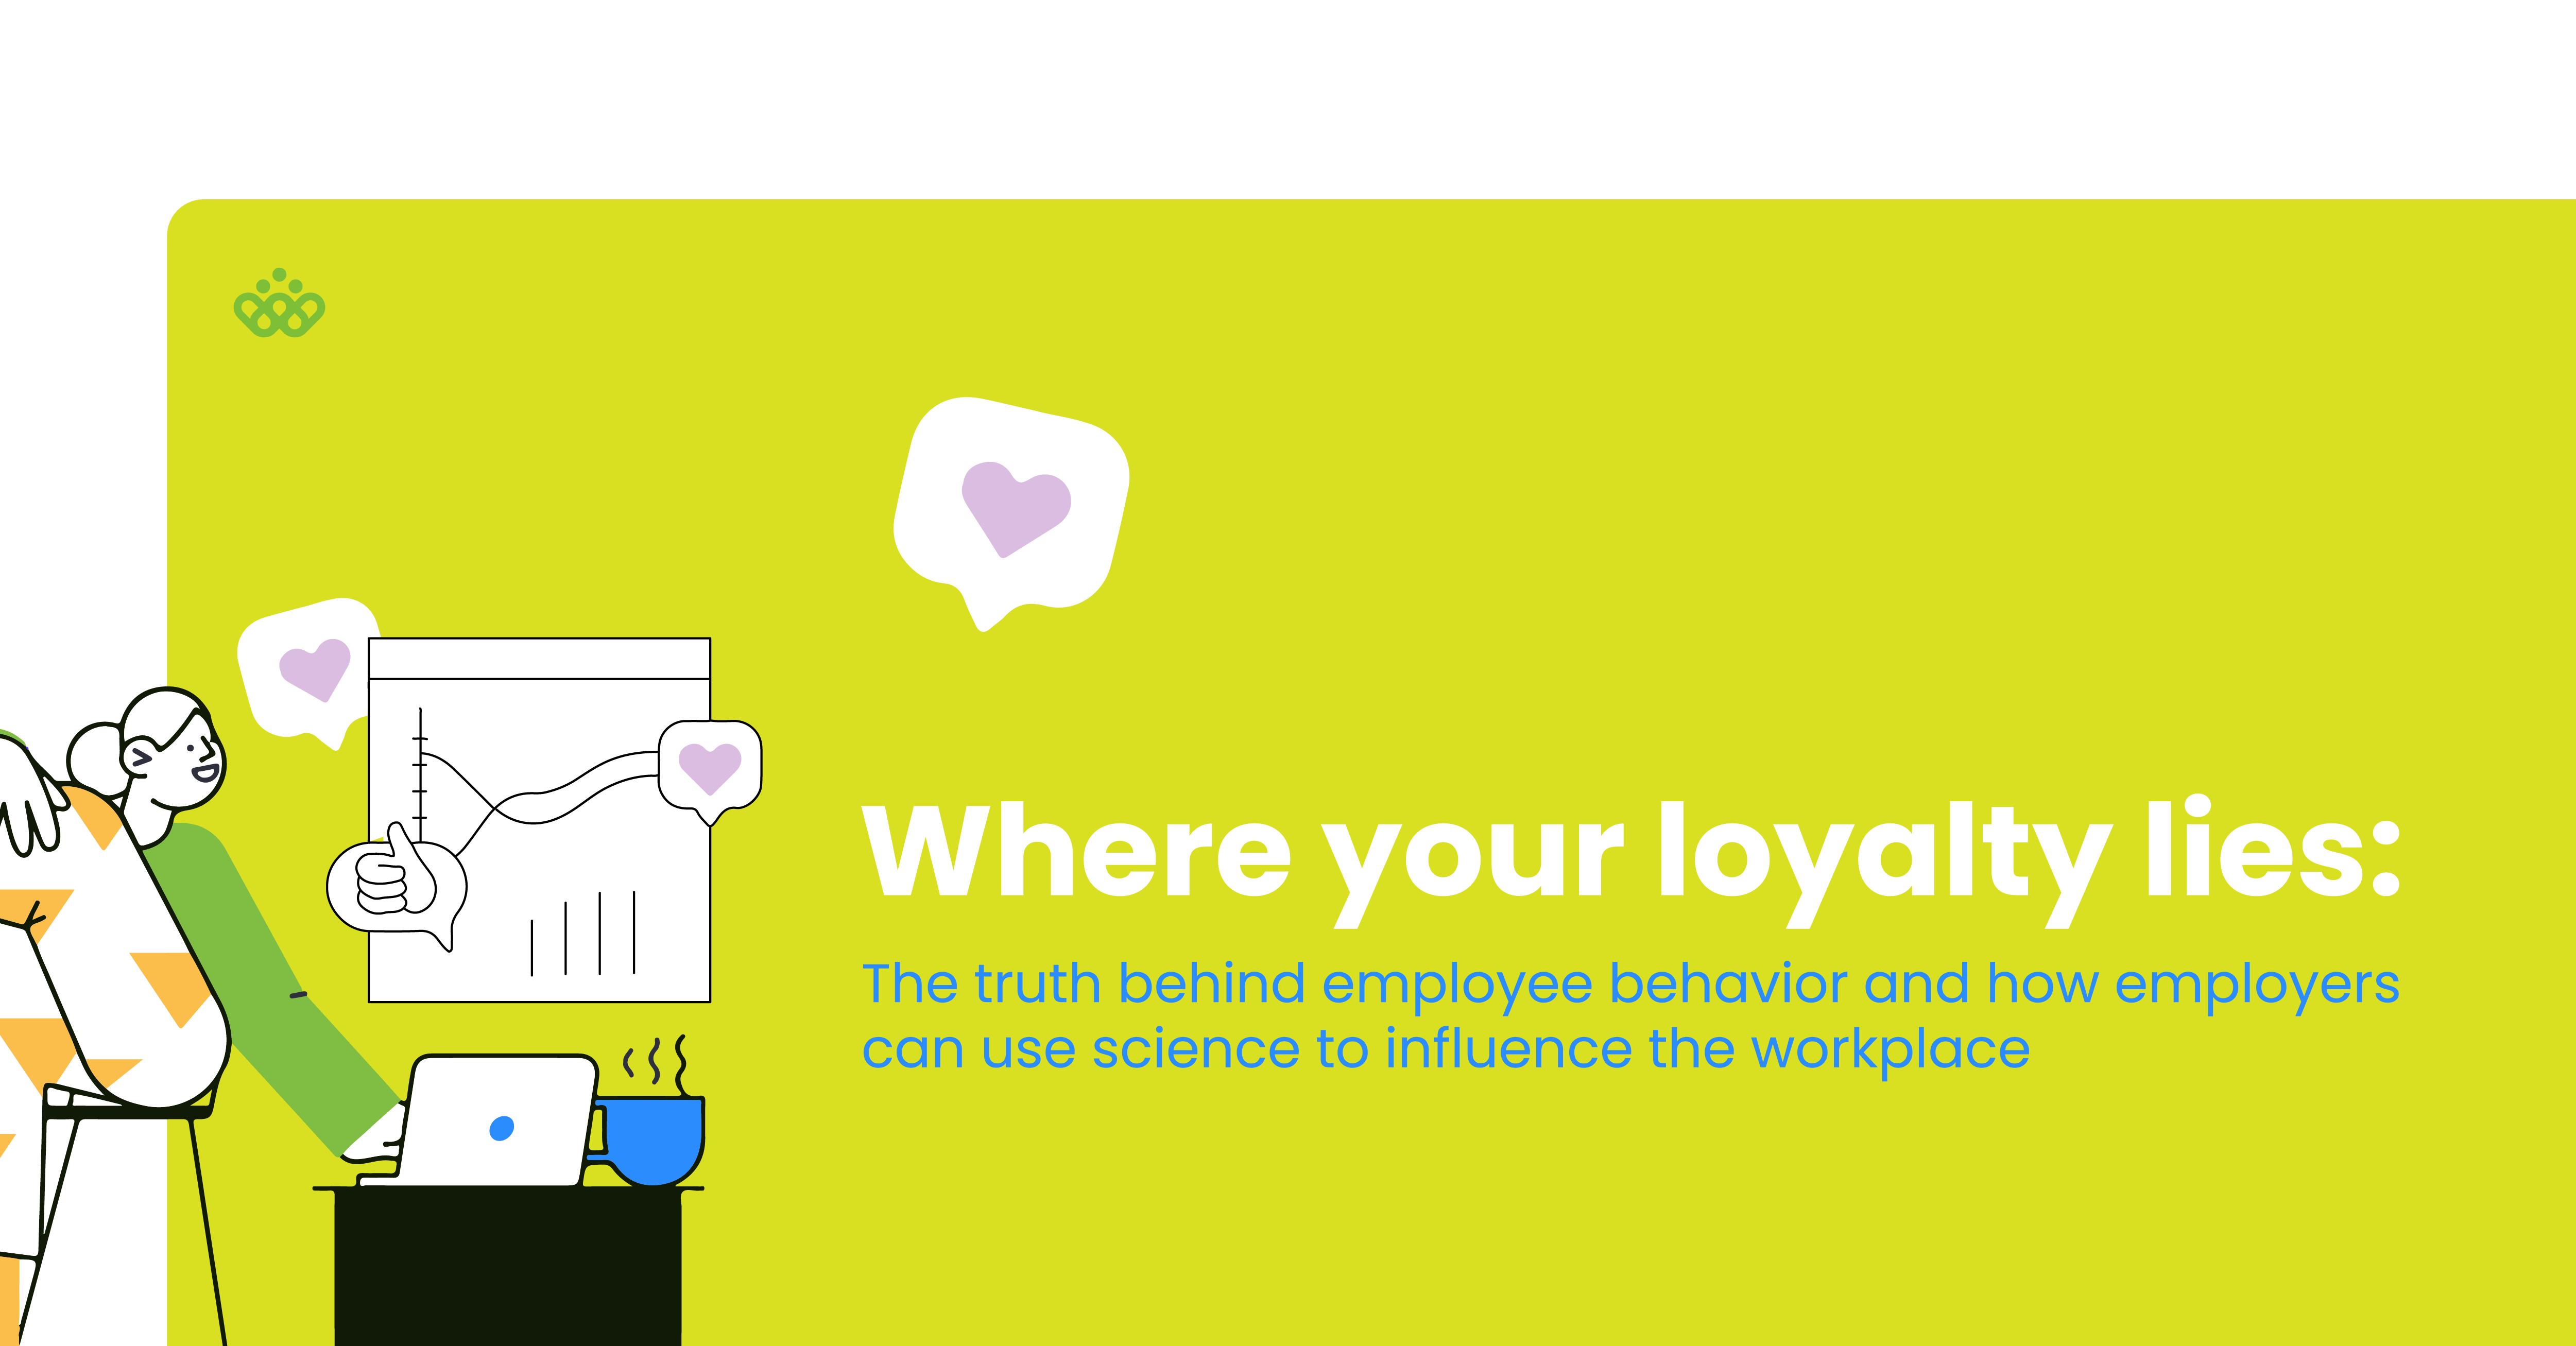 Where your loyalty lies: The truth behind employee behavior and how employers can use science to influence the workplace